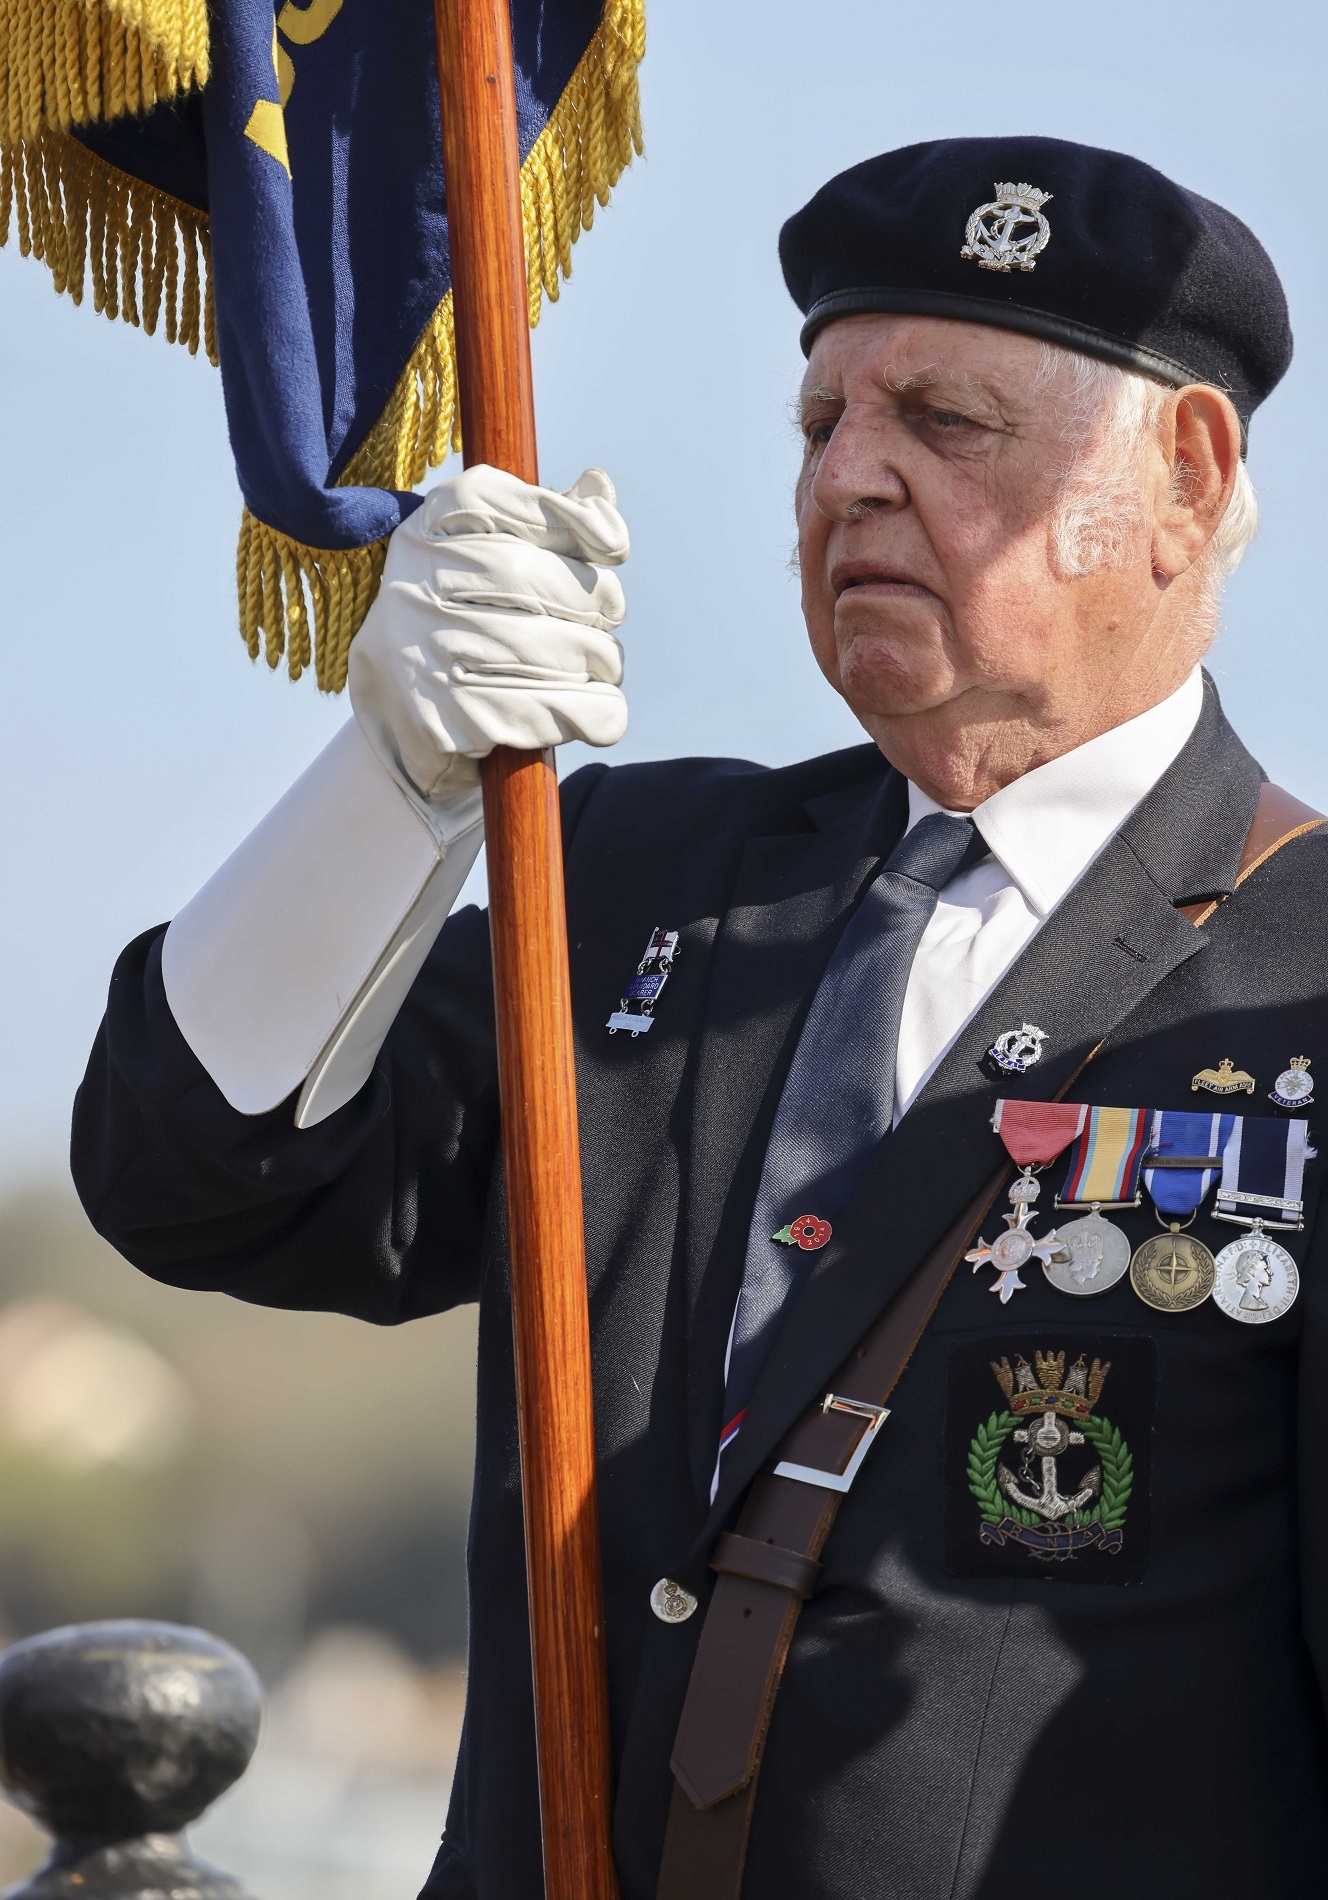 A Standard Bearer shoulders the flag during a service held on the Prince of Wales Pier marking the 80th anniversary of the St Nazaire raid. Credit: LPhot Dan Rosenbaum, RNAS Yeovilton